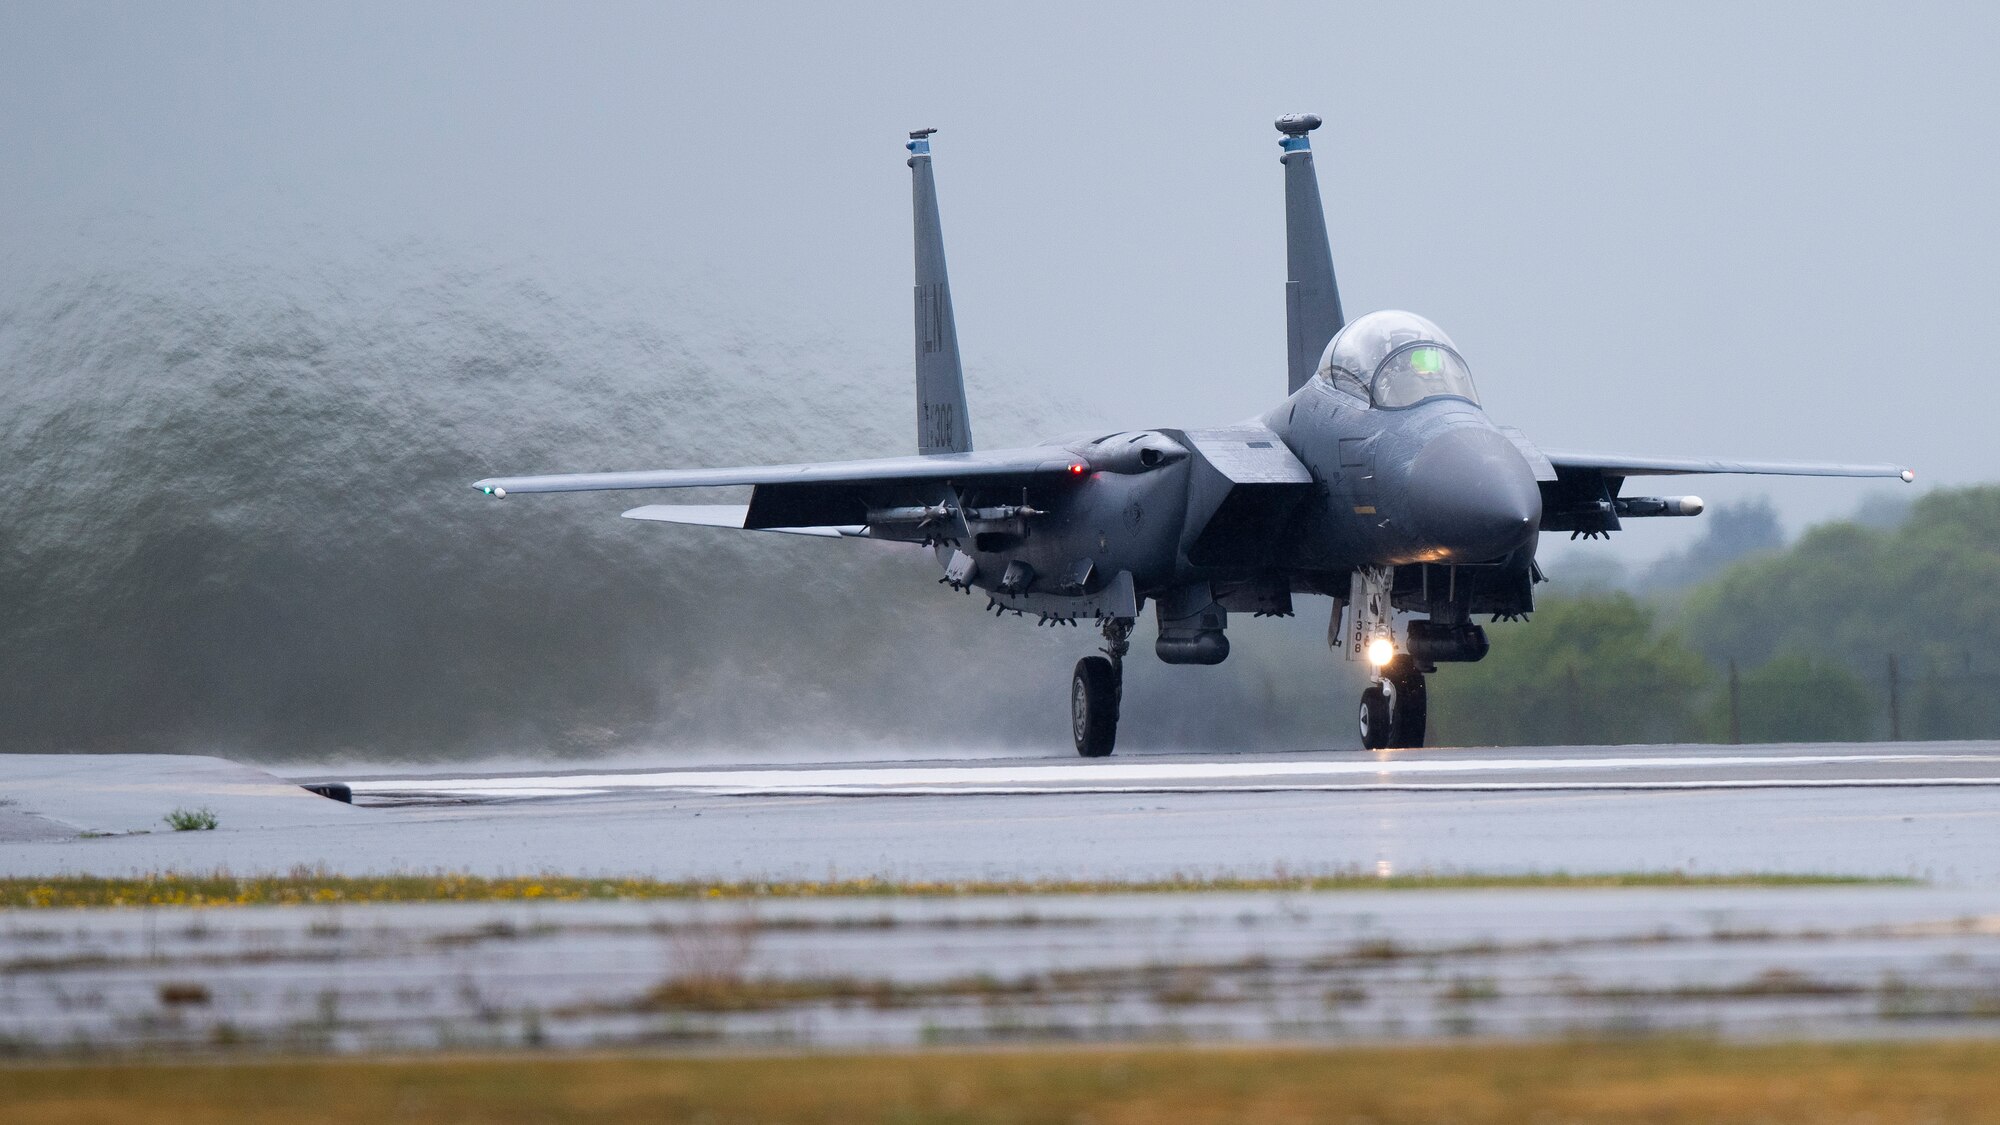 An F-15E Strike Eagle assigned to the 492nd Fighter Squadron prepares to take off from Royal Air Force Lakenheath, England, April 28, 2020. The 48th Fighter Wing continues to maintain mission-readiness in order to safeguard U.S. national interests and those of our allies and partners, despite the current COVID-19 crisis. (U.S. Air Force photo by Airman 1st Class Jessi Monte)